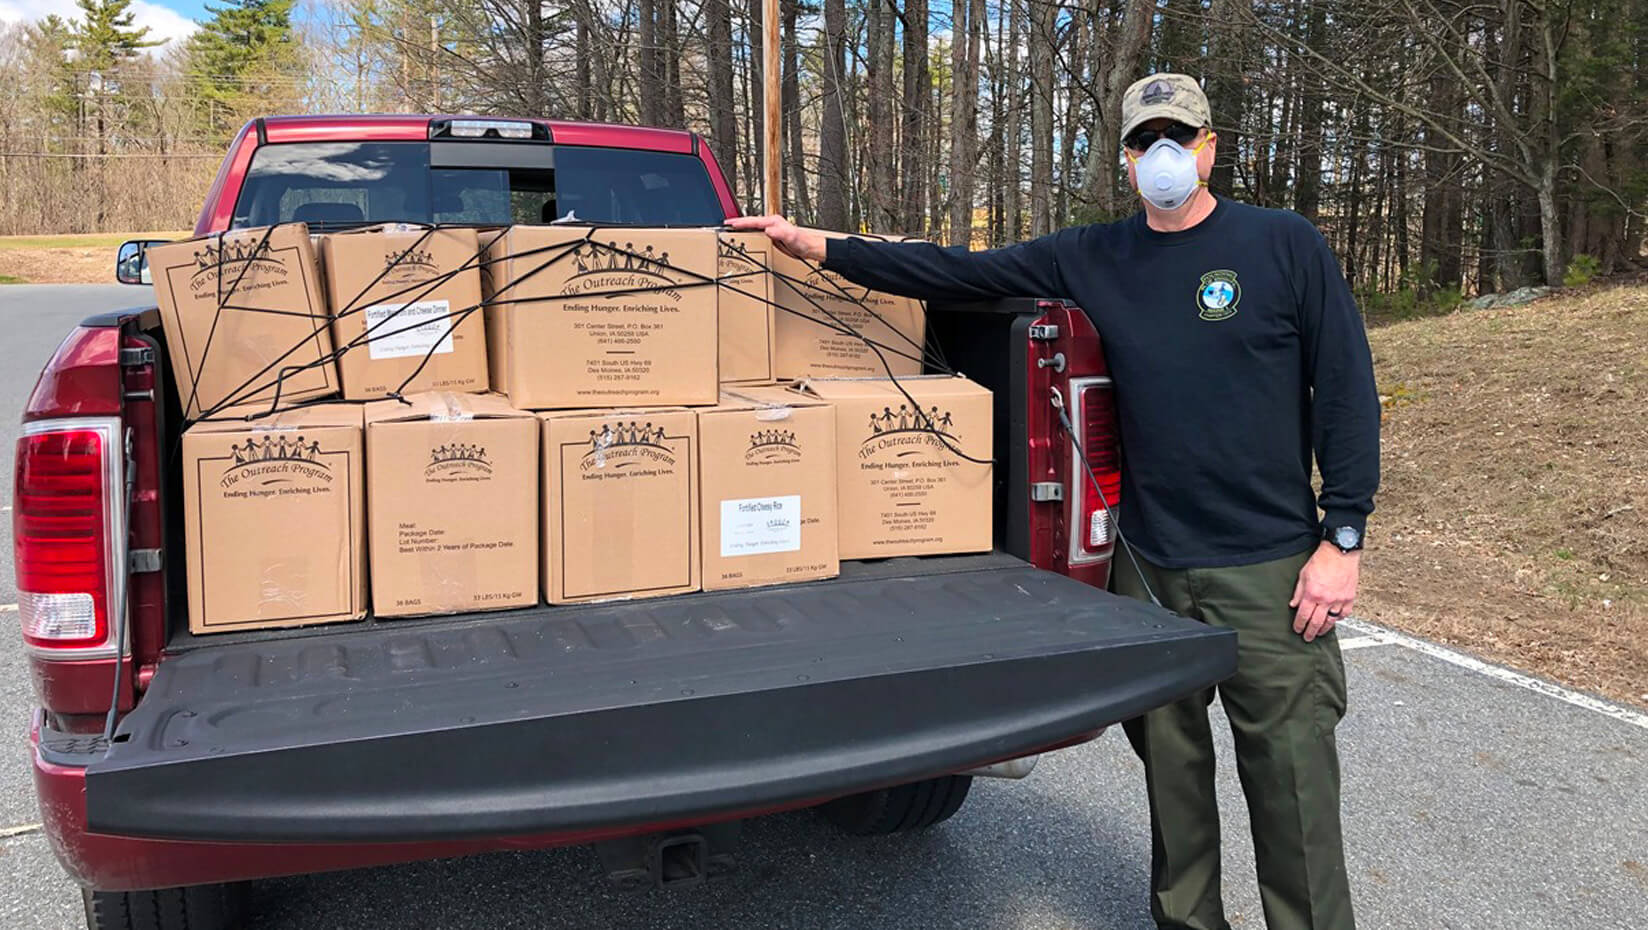 Dave Wight, a member of Blue Knights Maine Chapter 1, with meals packed for distribution through the Good Shepherd Food Bank.